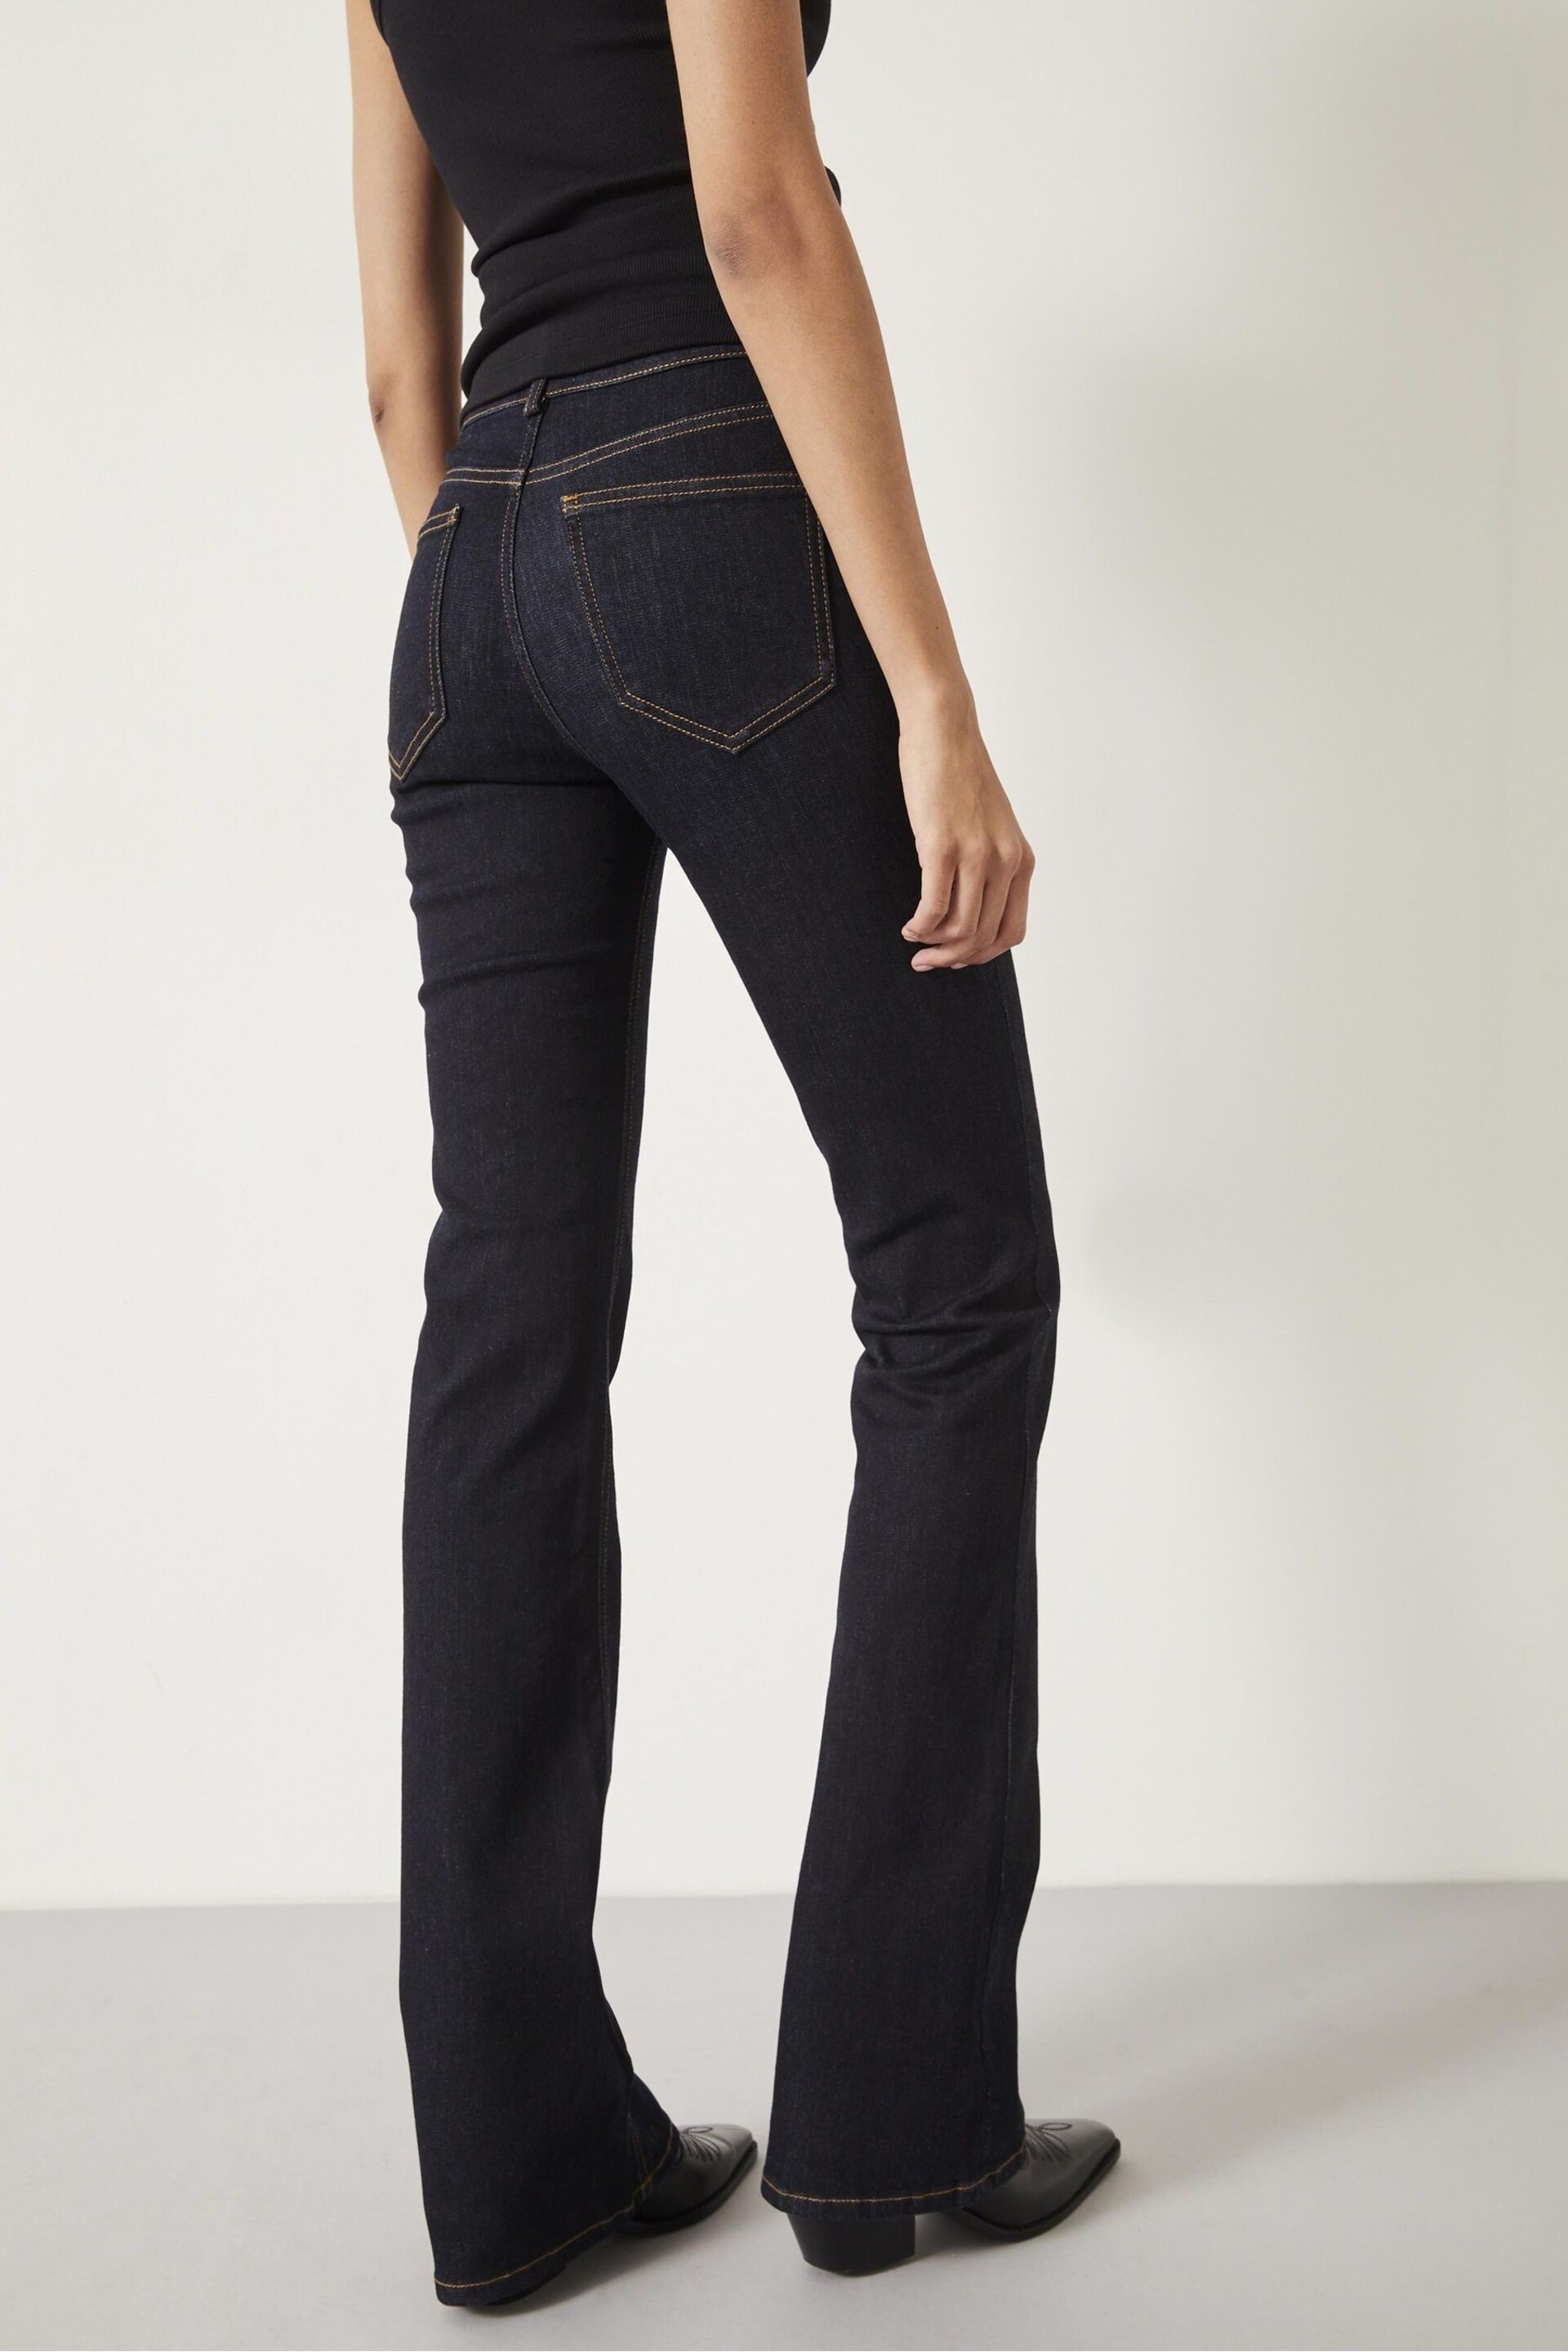 Hush Blue Tall Lorna Bootcut Jeans - Image 2 of 5